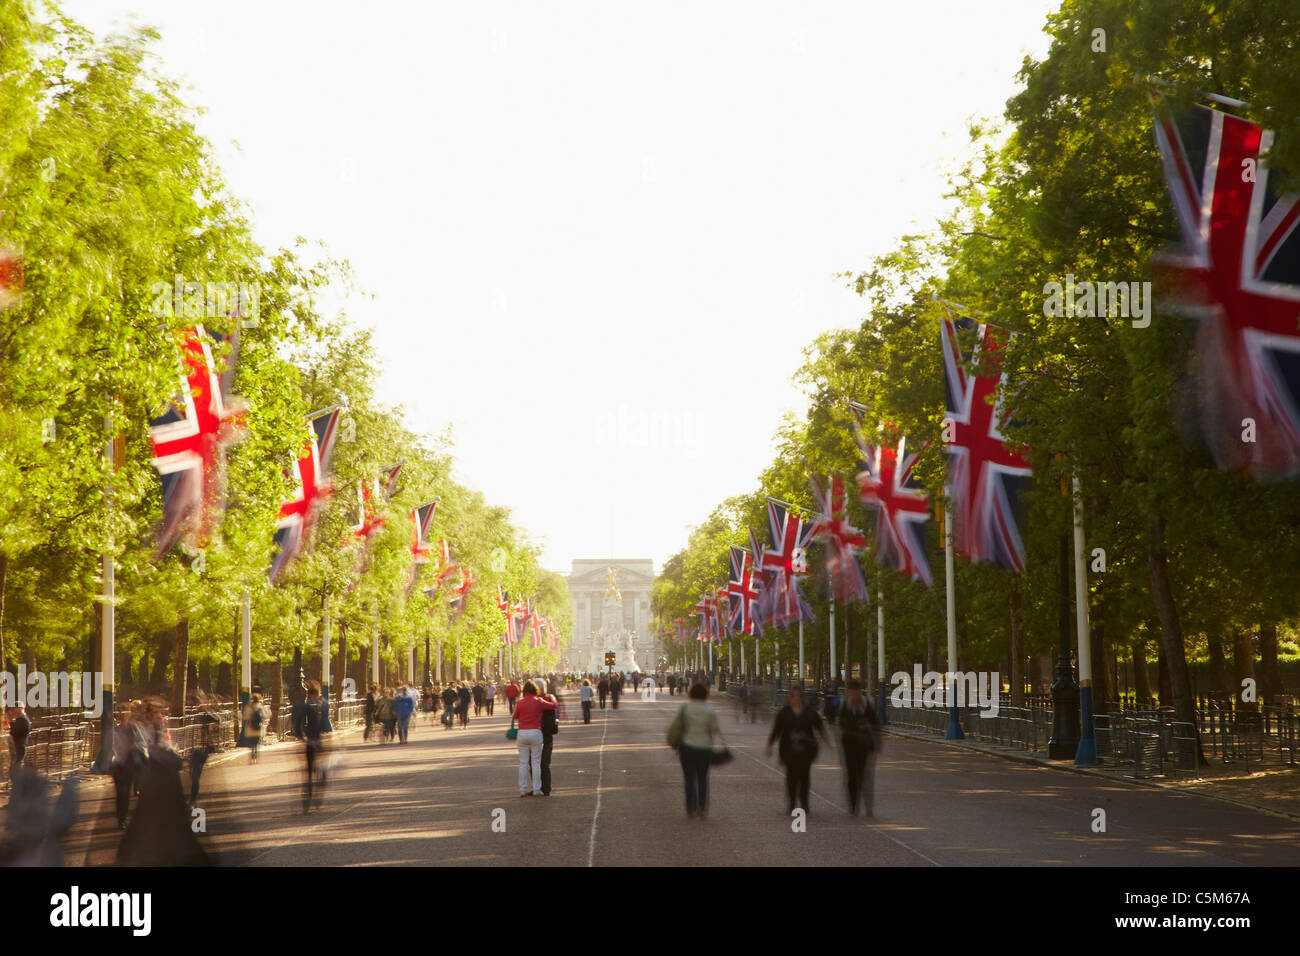 Union jack flags along the road Stock Photo